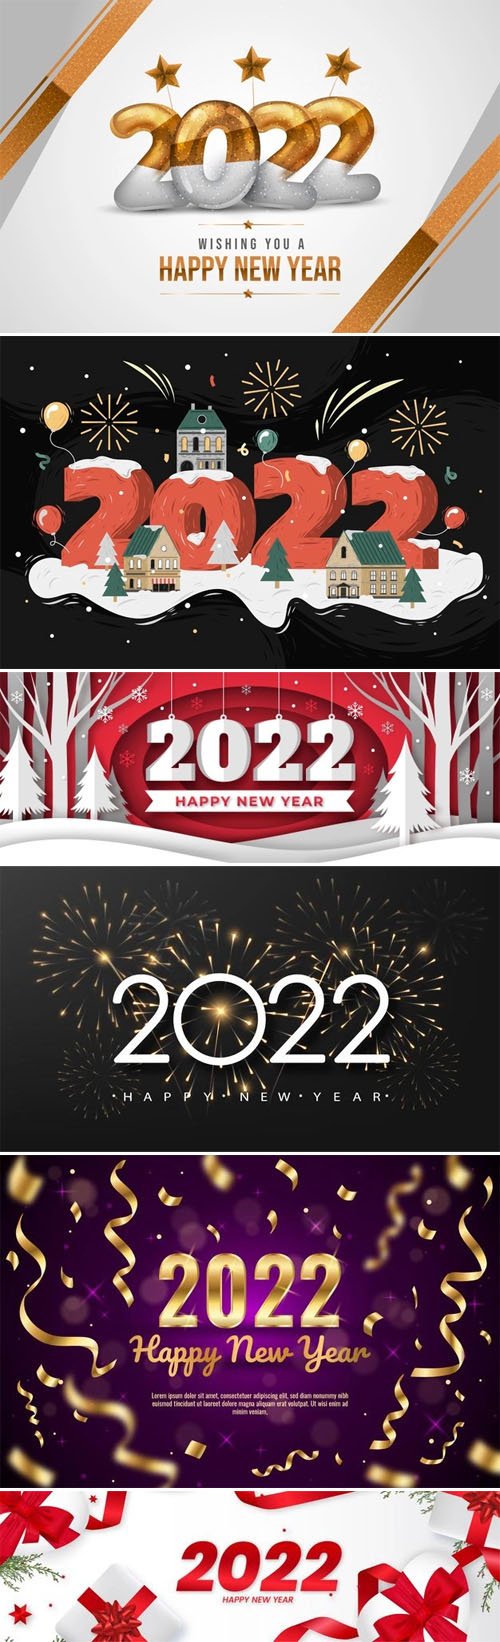 10 Happy New Year 2022 Banners & Backgrounds Vector Templates Vol.2